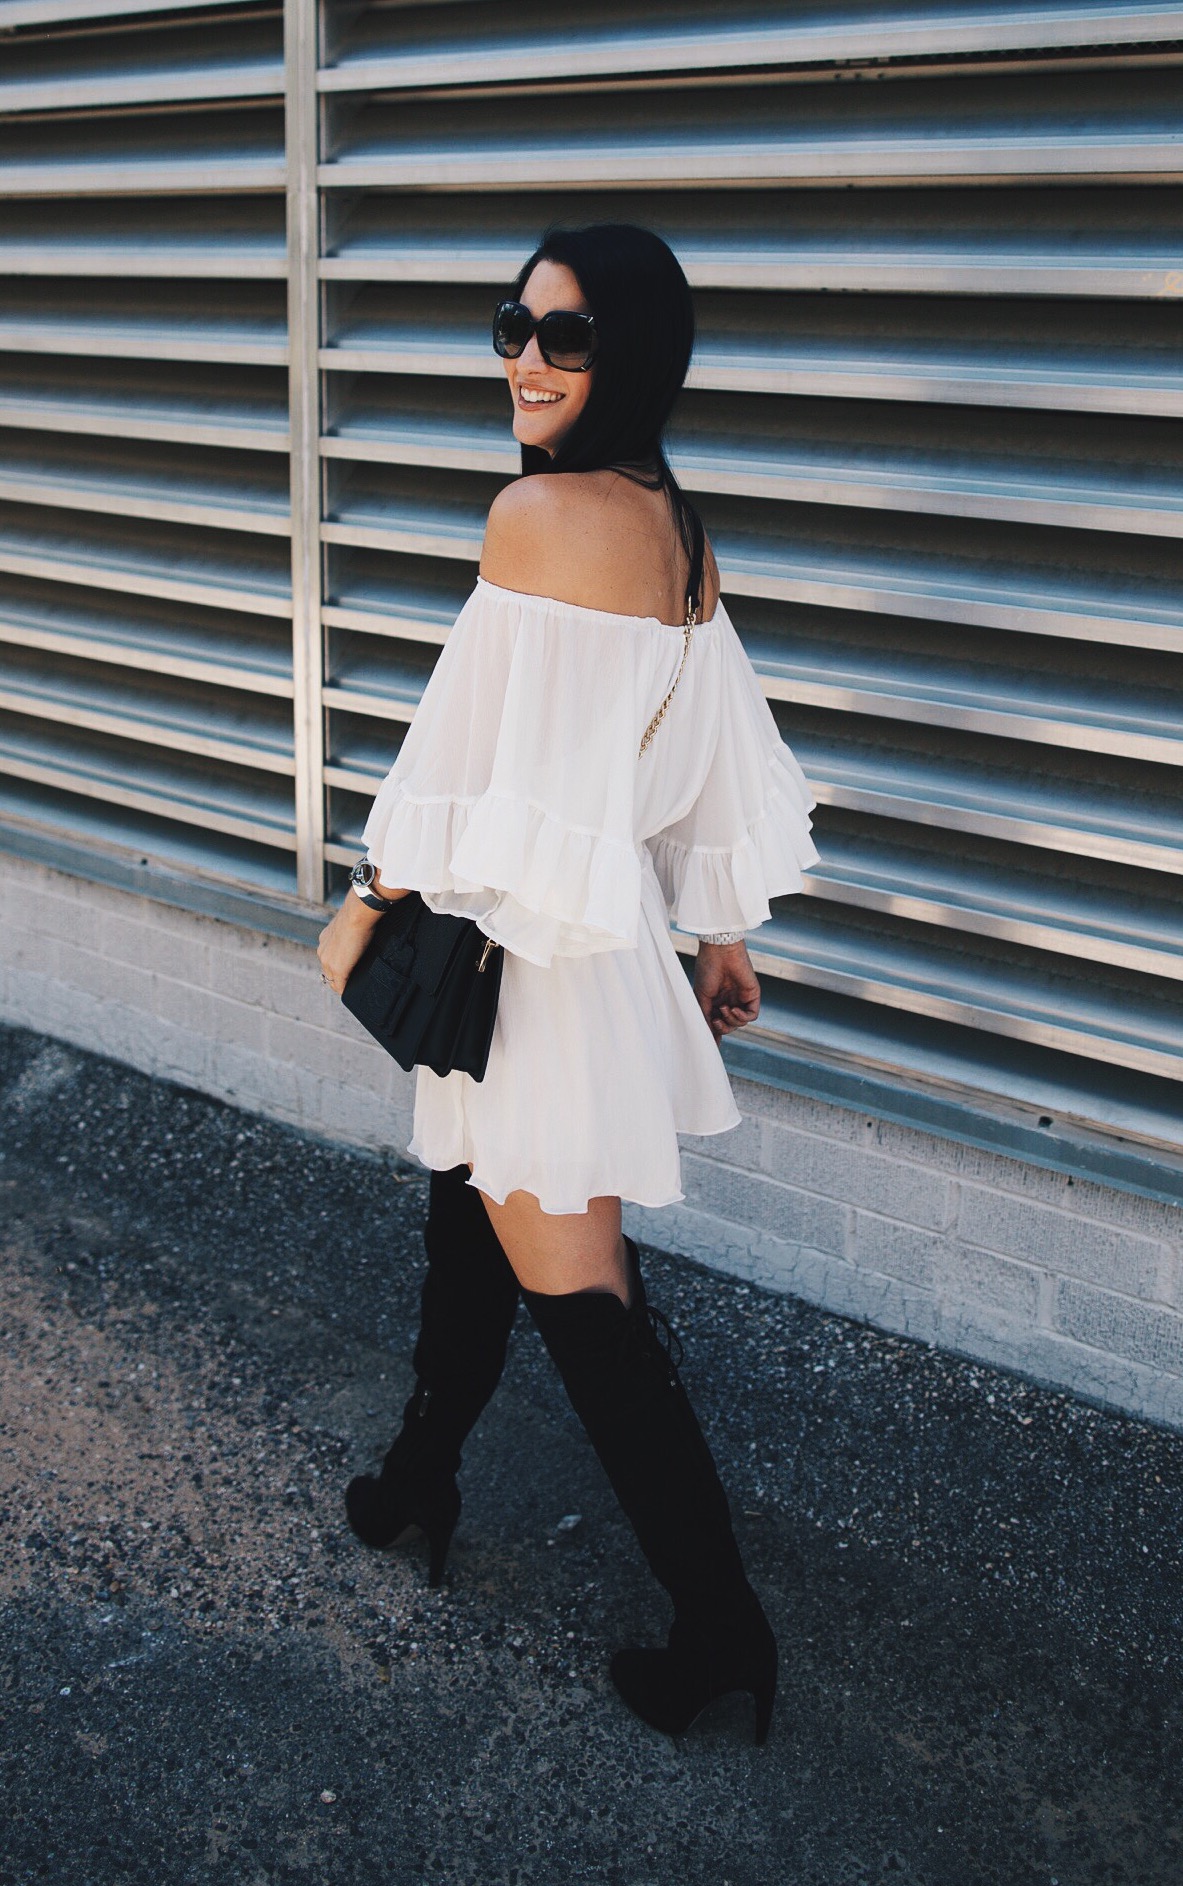 White Romper and Over the Knee Boots | how to style a romper | how to wear a romper | how to style OTK boots | how to wear OTK boots | summer fashion tips | summer outfit ideas | summer style tips | what to wear for summer | warm weather fashion | fashion for summer | style tips for summer | outfit ideas for summer || Dressed to Kill